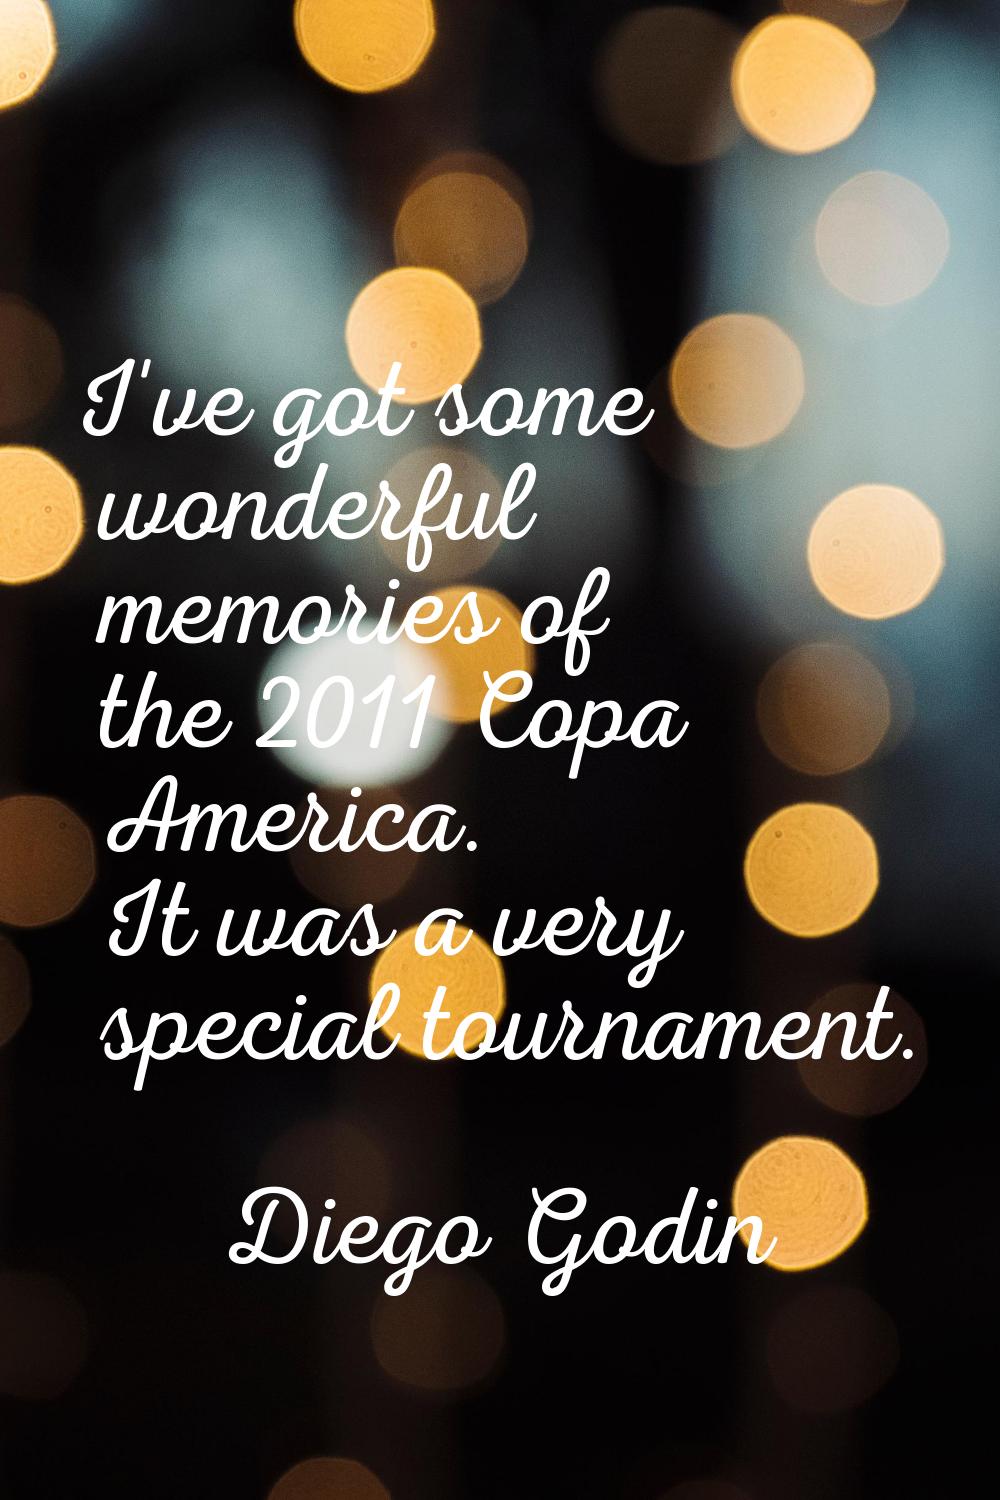 I've got some wonderful memories of the 2011 Copa America. It was a very special tournament.